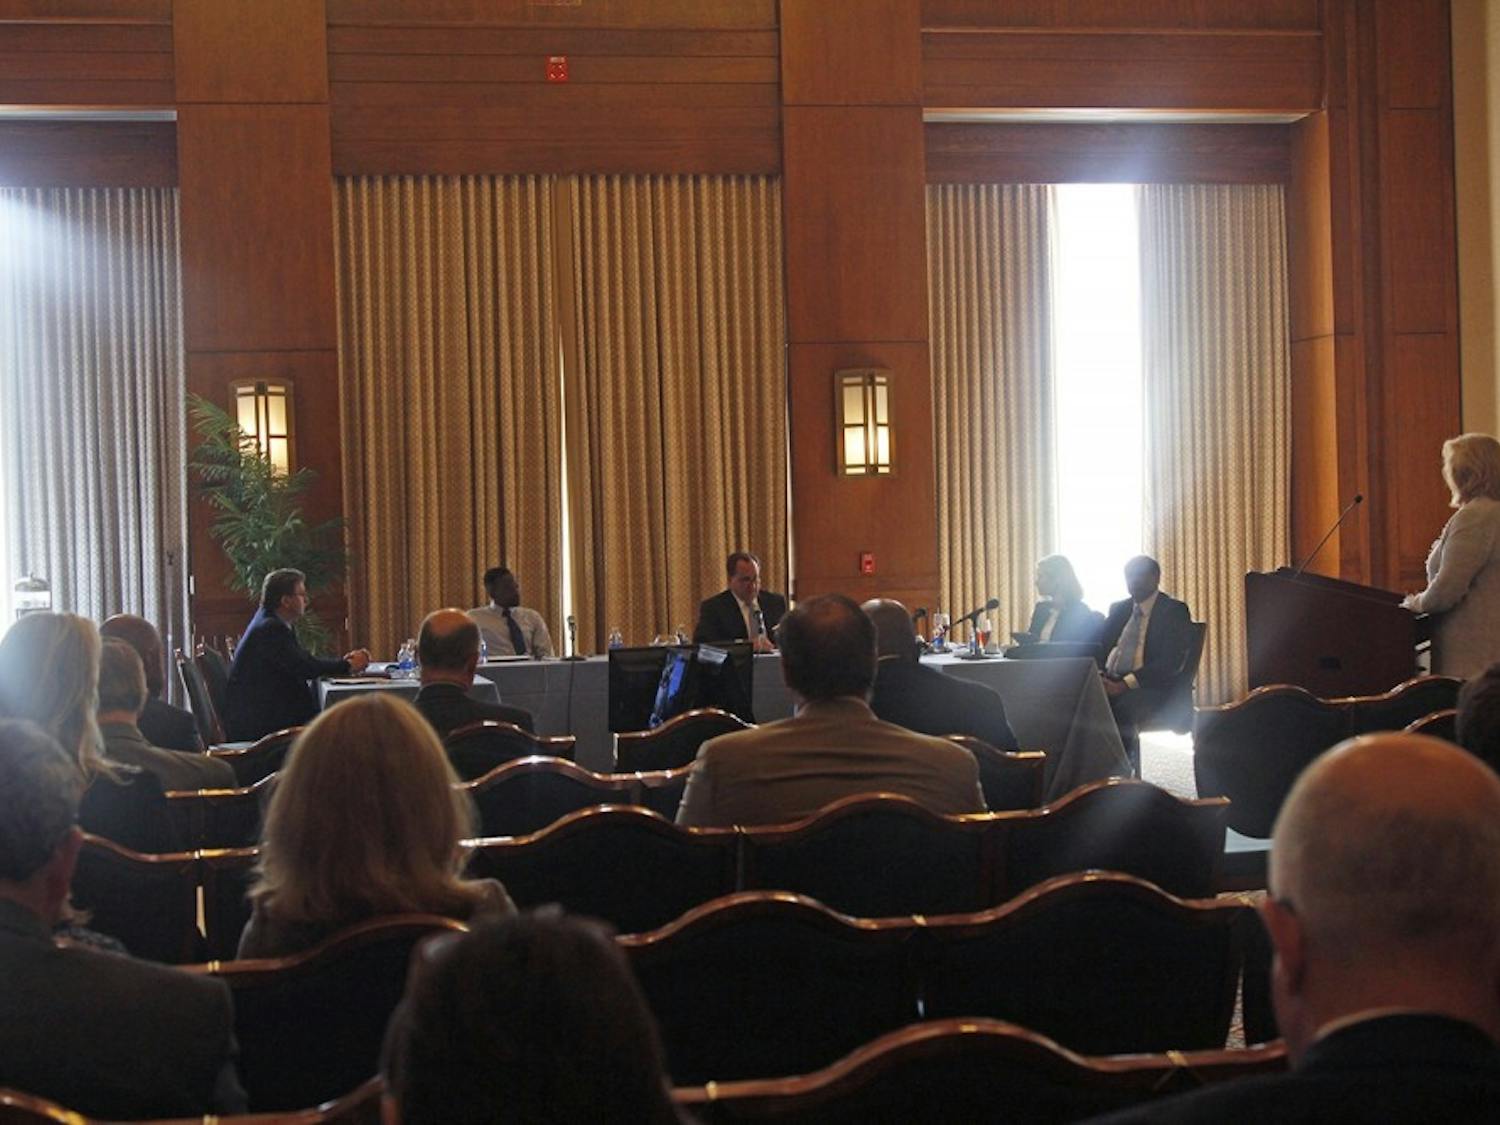 The Board of Trustees met in the George Watts Hill Alumni Center in March 2017.